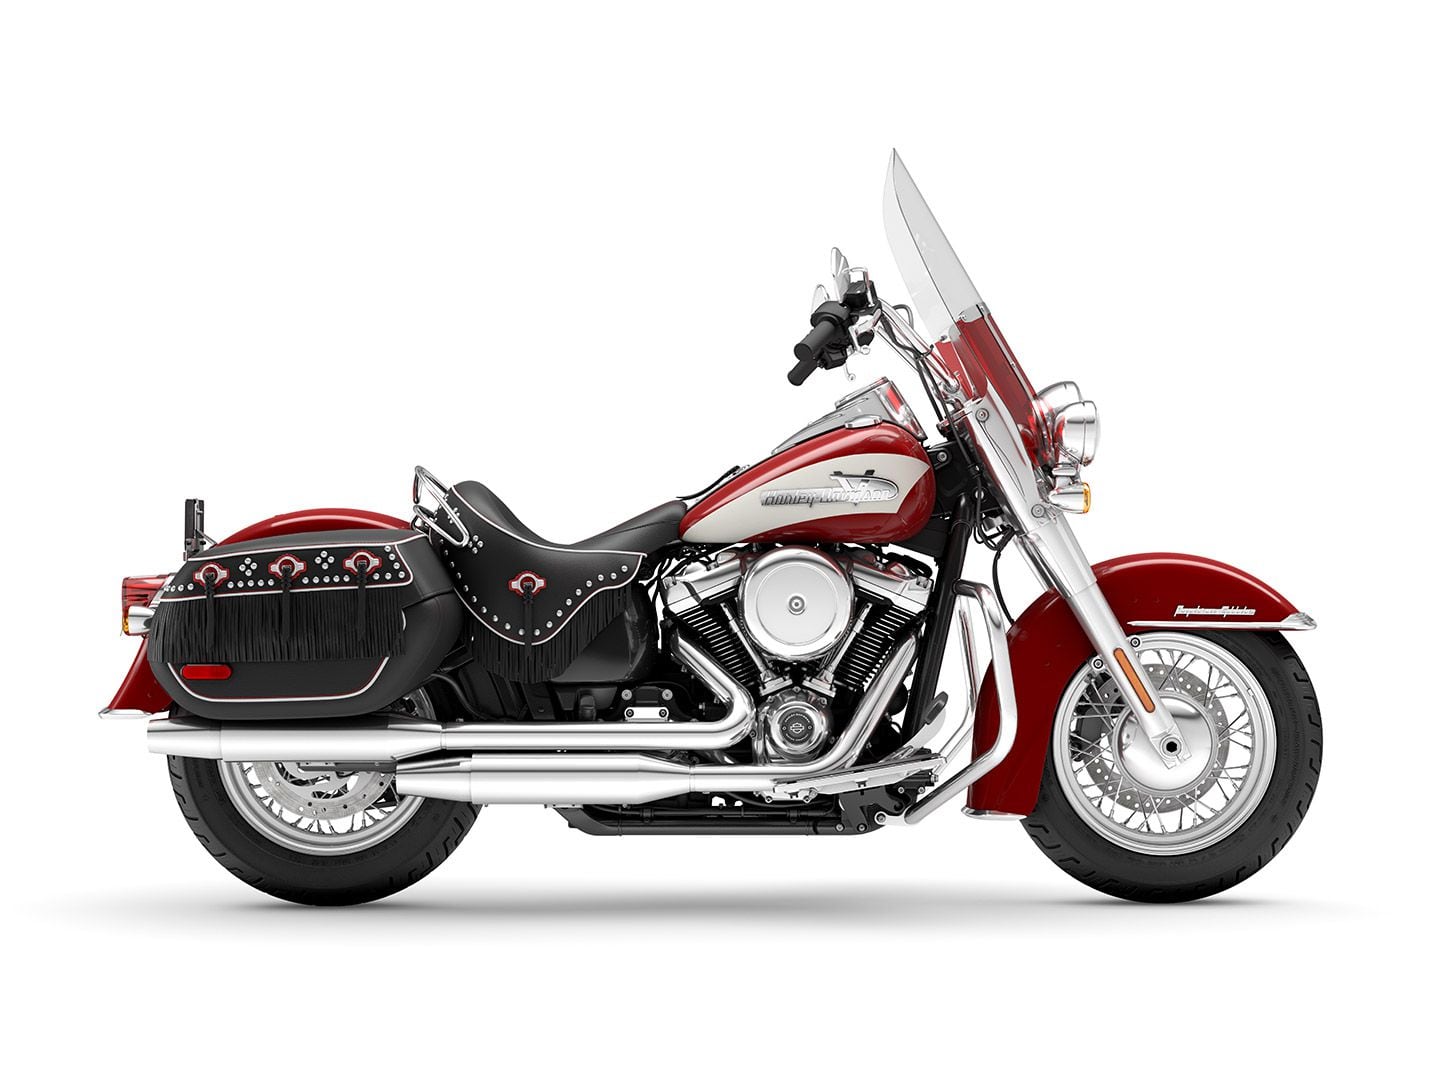 The Hydra-Glide Revival uses the Milwaukee-Eight 114.